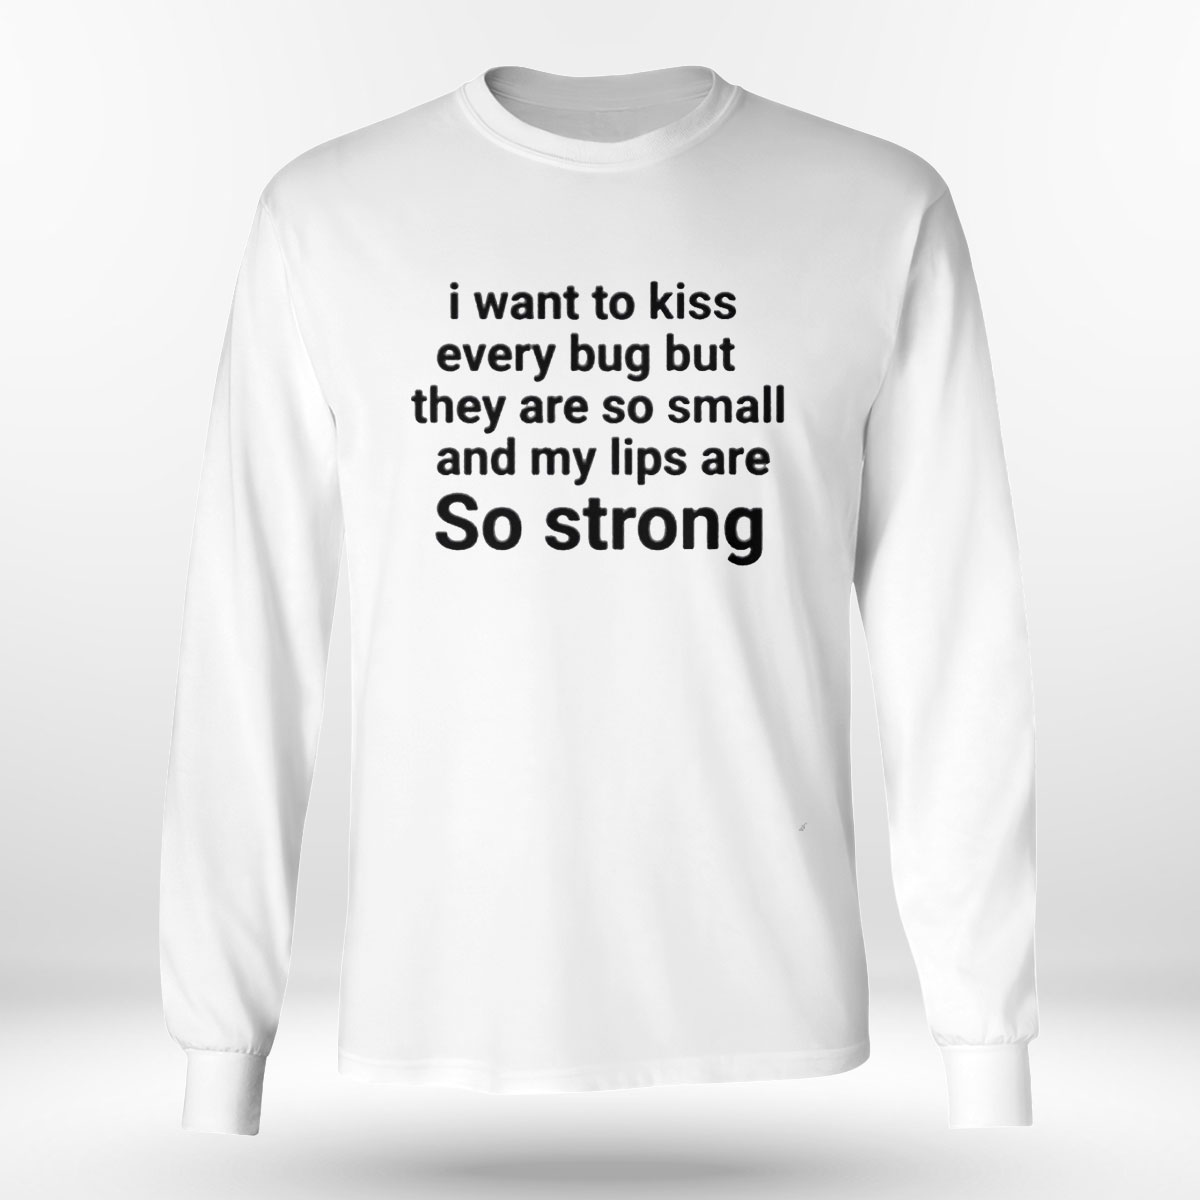 I Want To Kiss Every Bug But They Are So Small And My Lips Are So Strong T-shirt